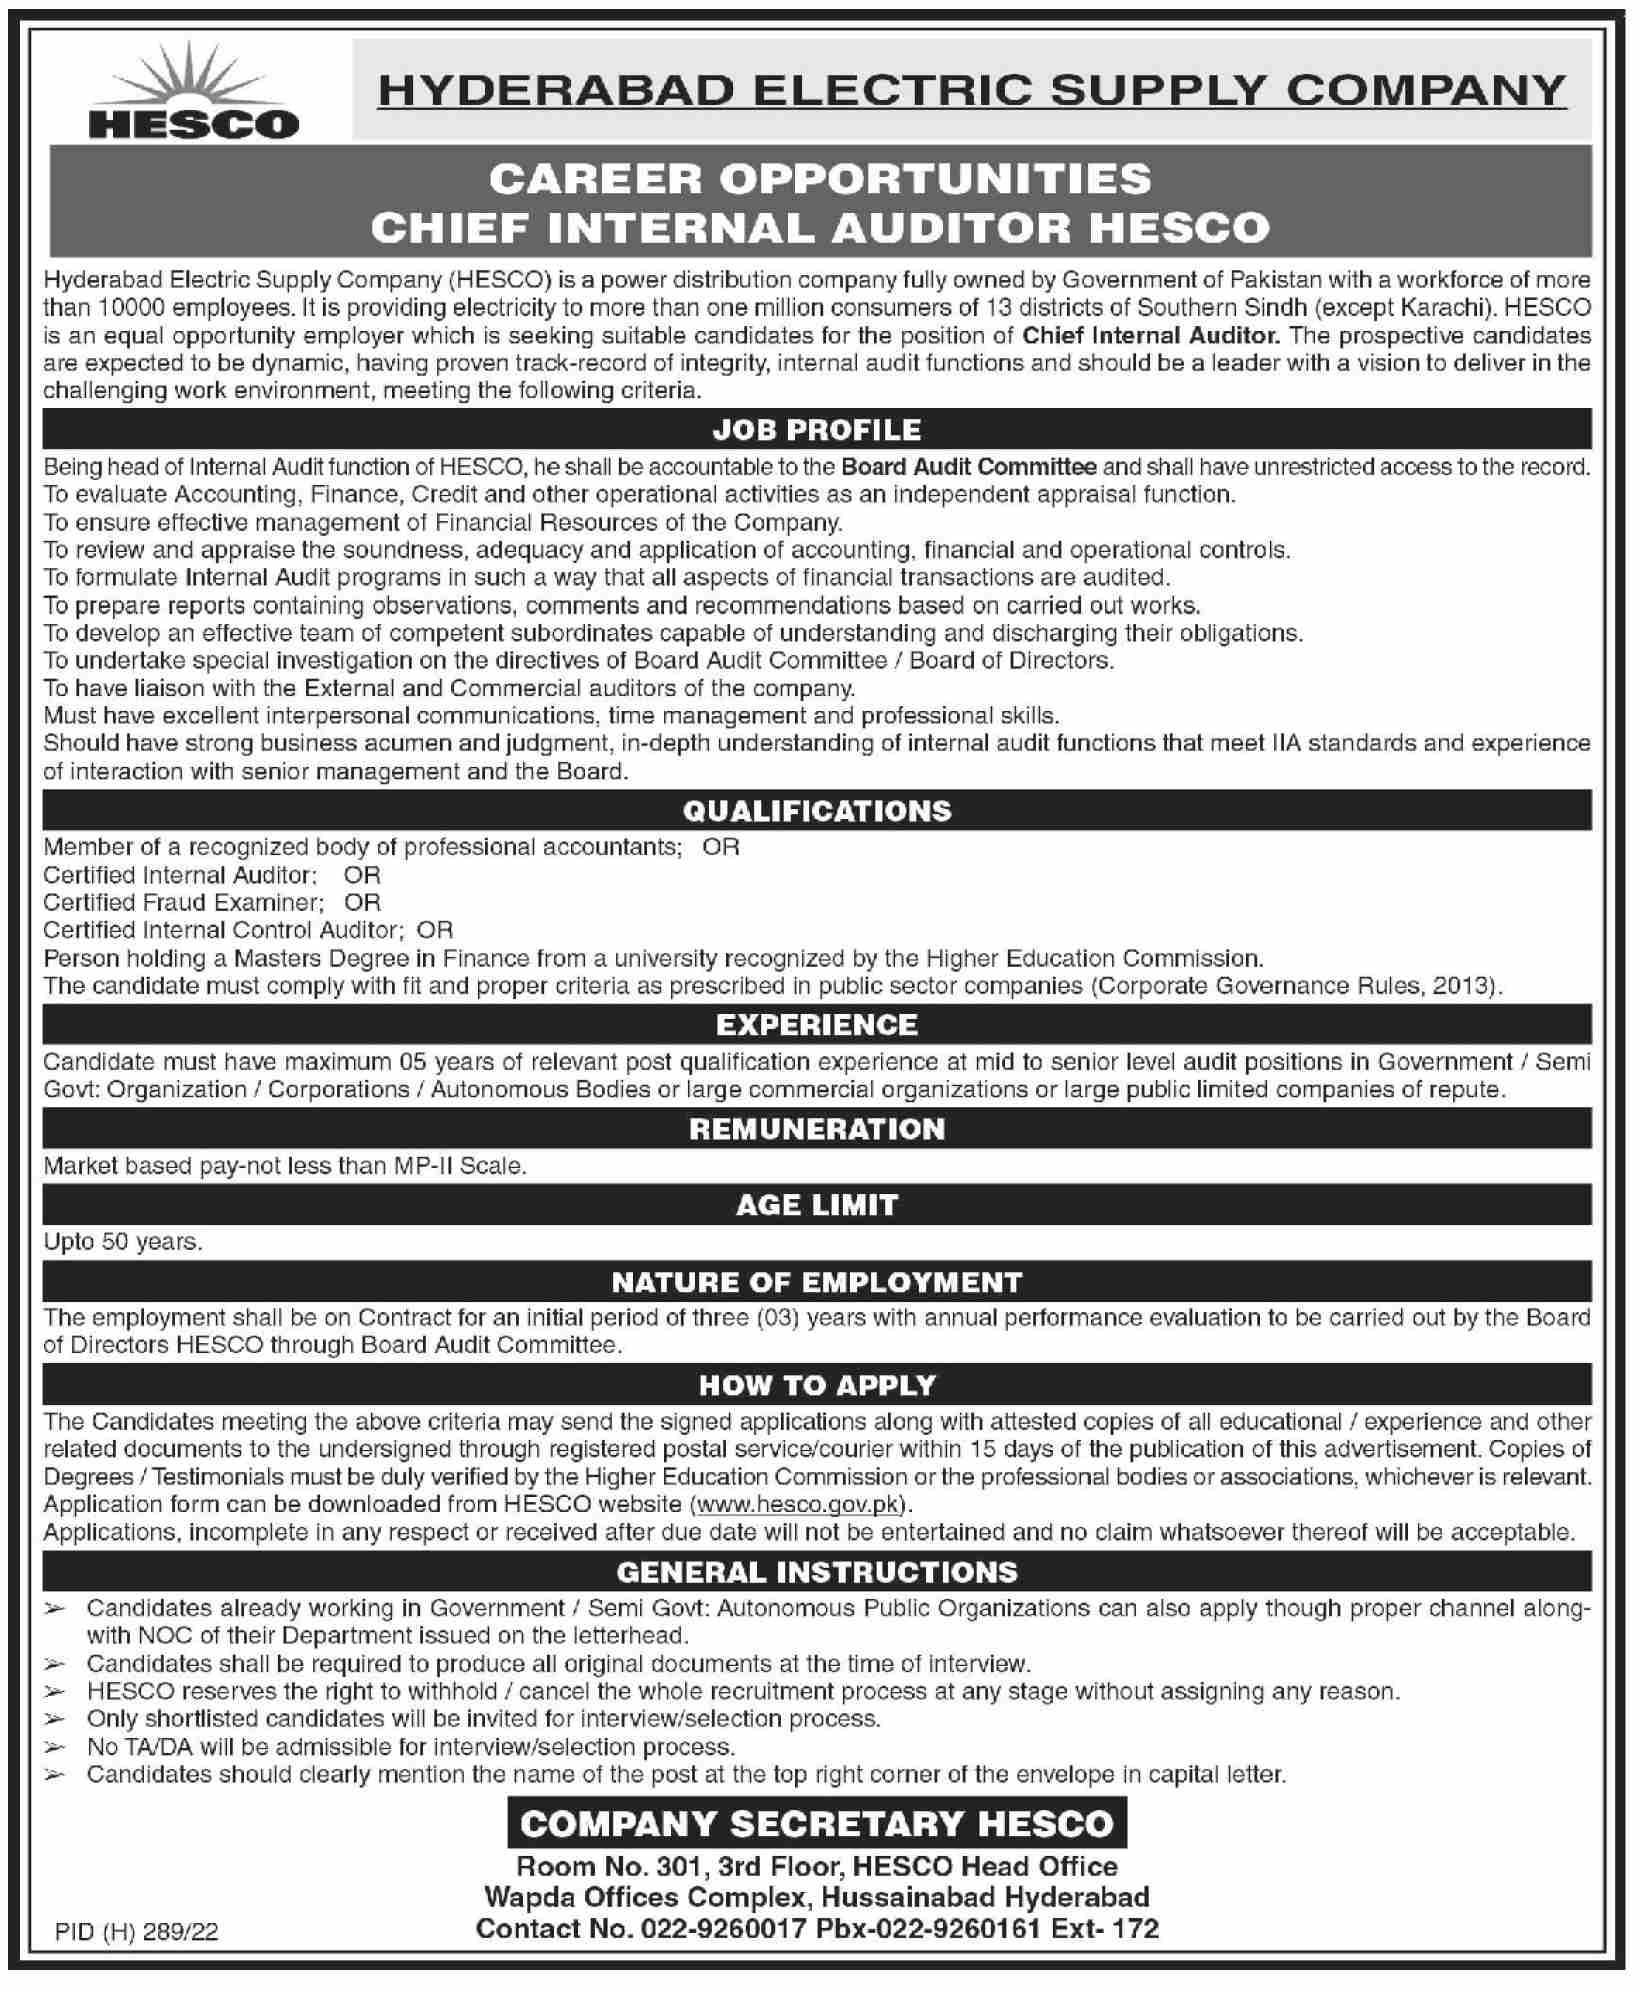 Hyderabad Electric Supply Company HESCO Jobs in 2023